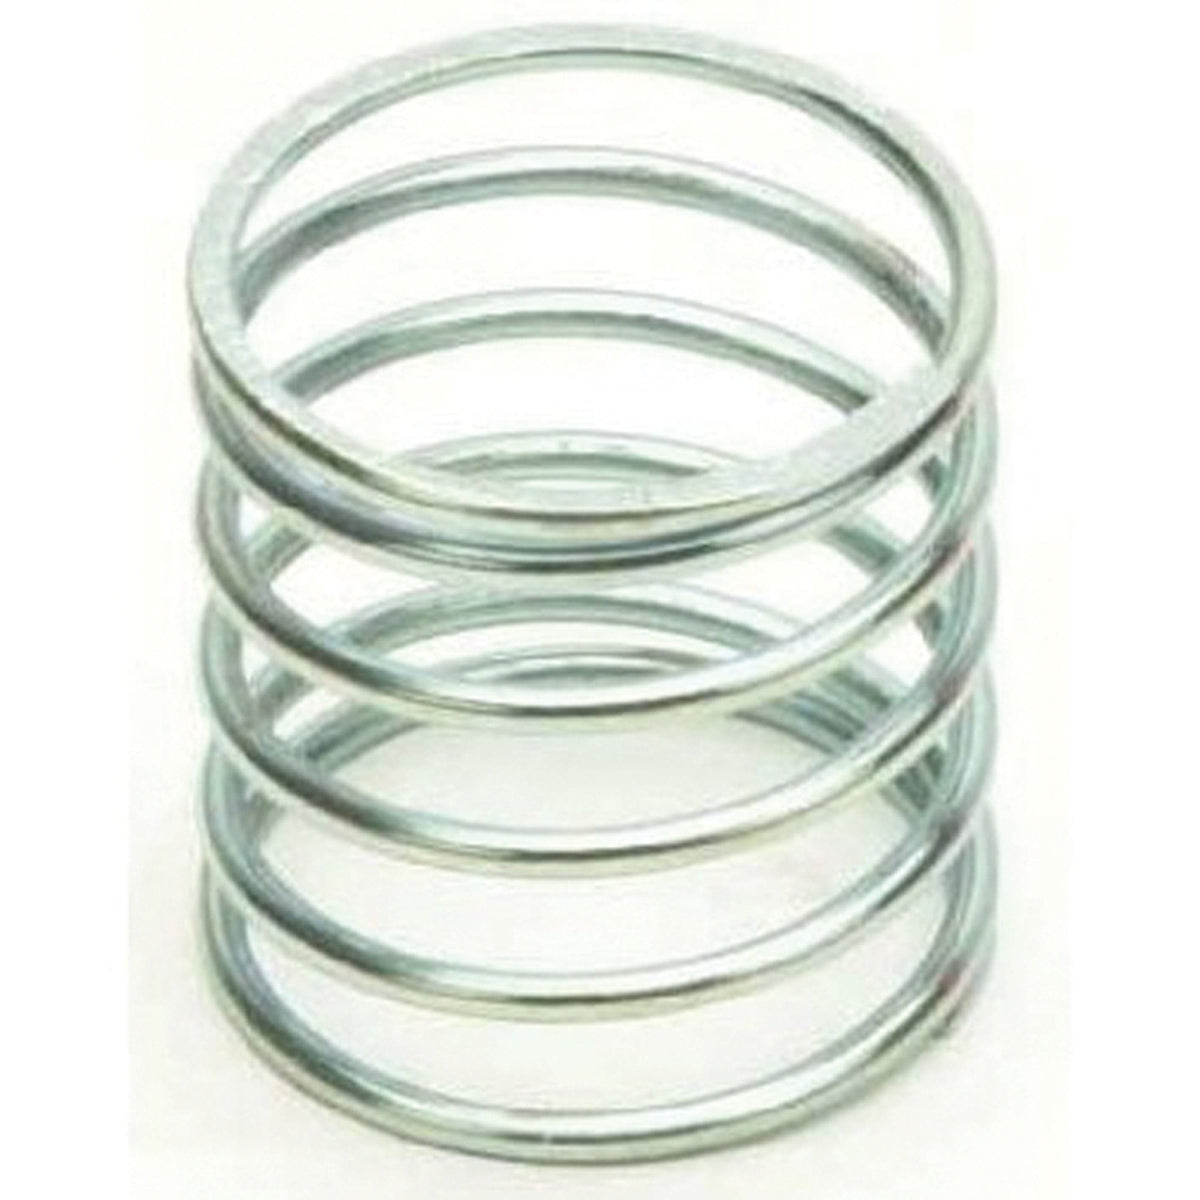 Winegard Qualifies for Free Shipping Winegard Replacement Spring for RV TV Antenna #RP-6822